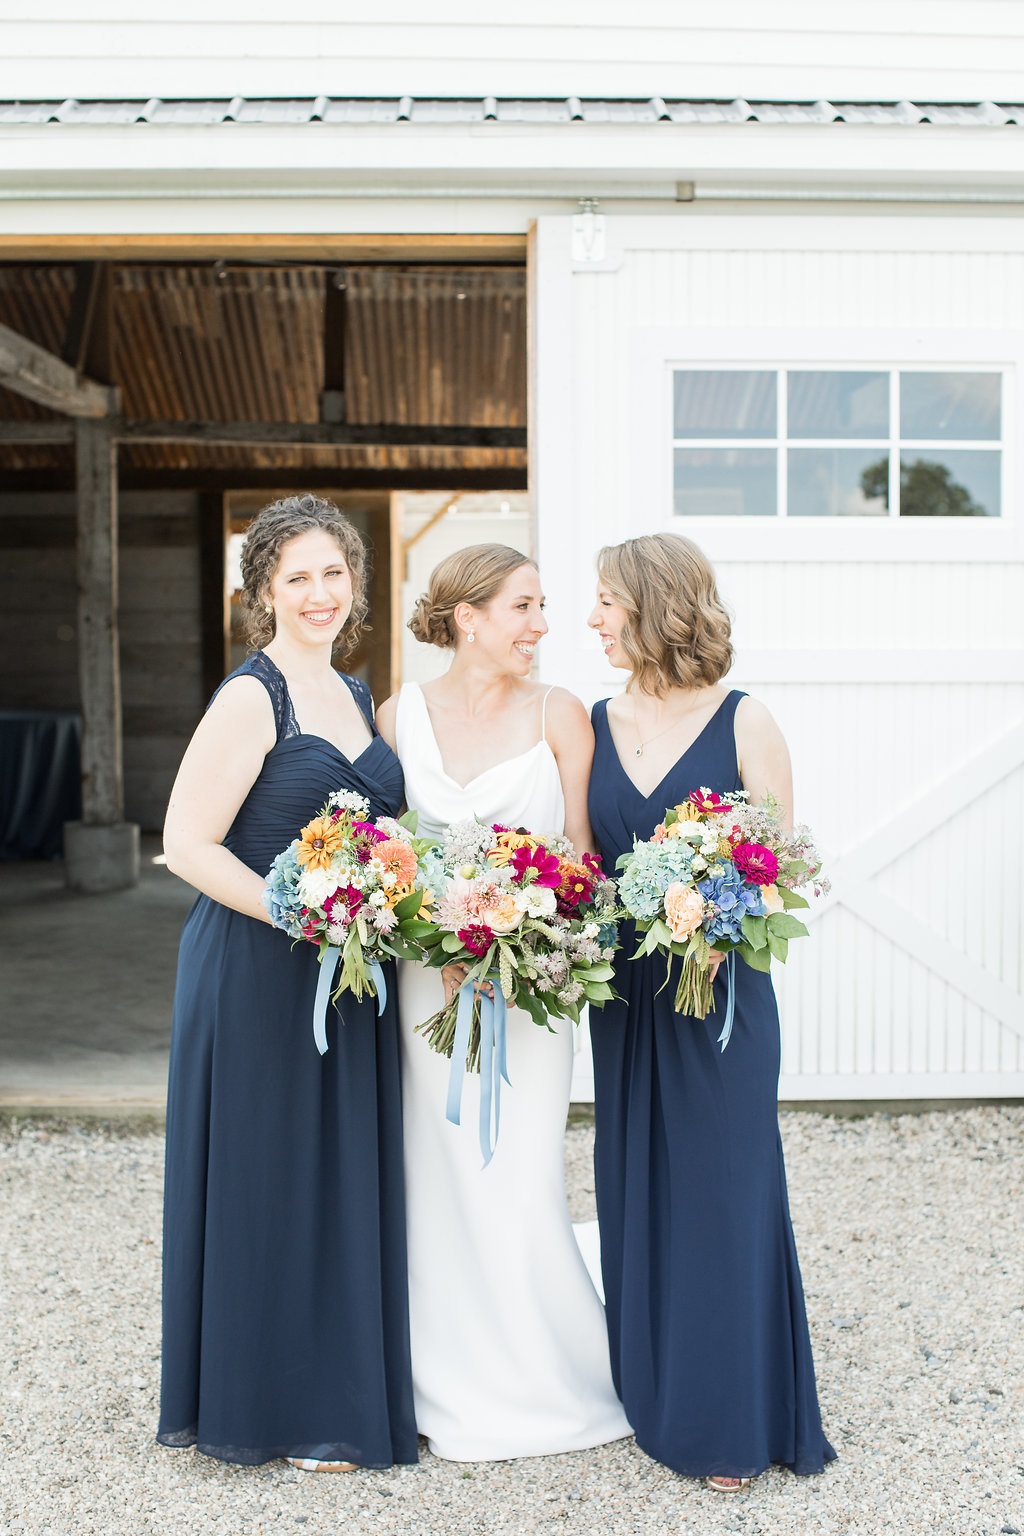 Monica-Relyea-Events-Kelsey-Combe-Photography-Dana-and-Mark-South-Farms-wedding-morris-connecticut-barn-tent-jewish-farm-country-litchfield-county321